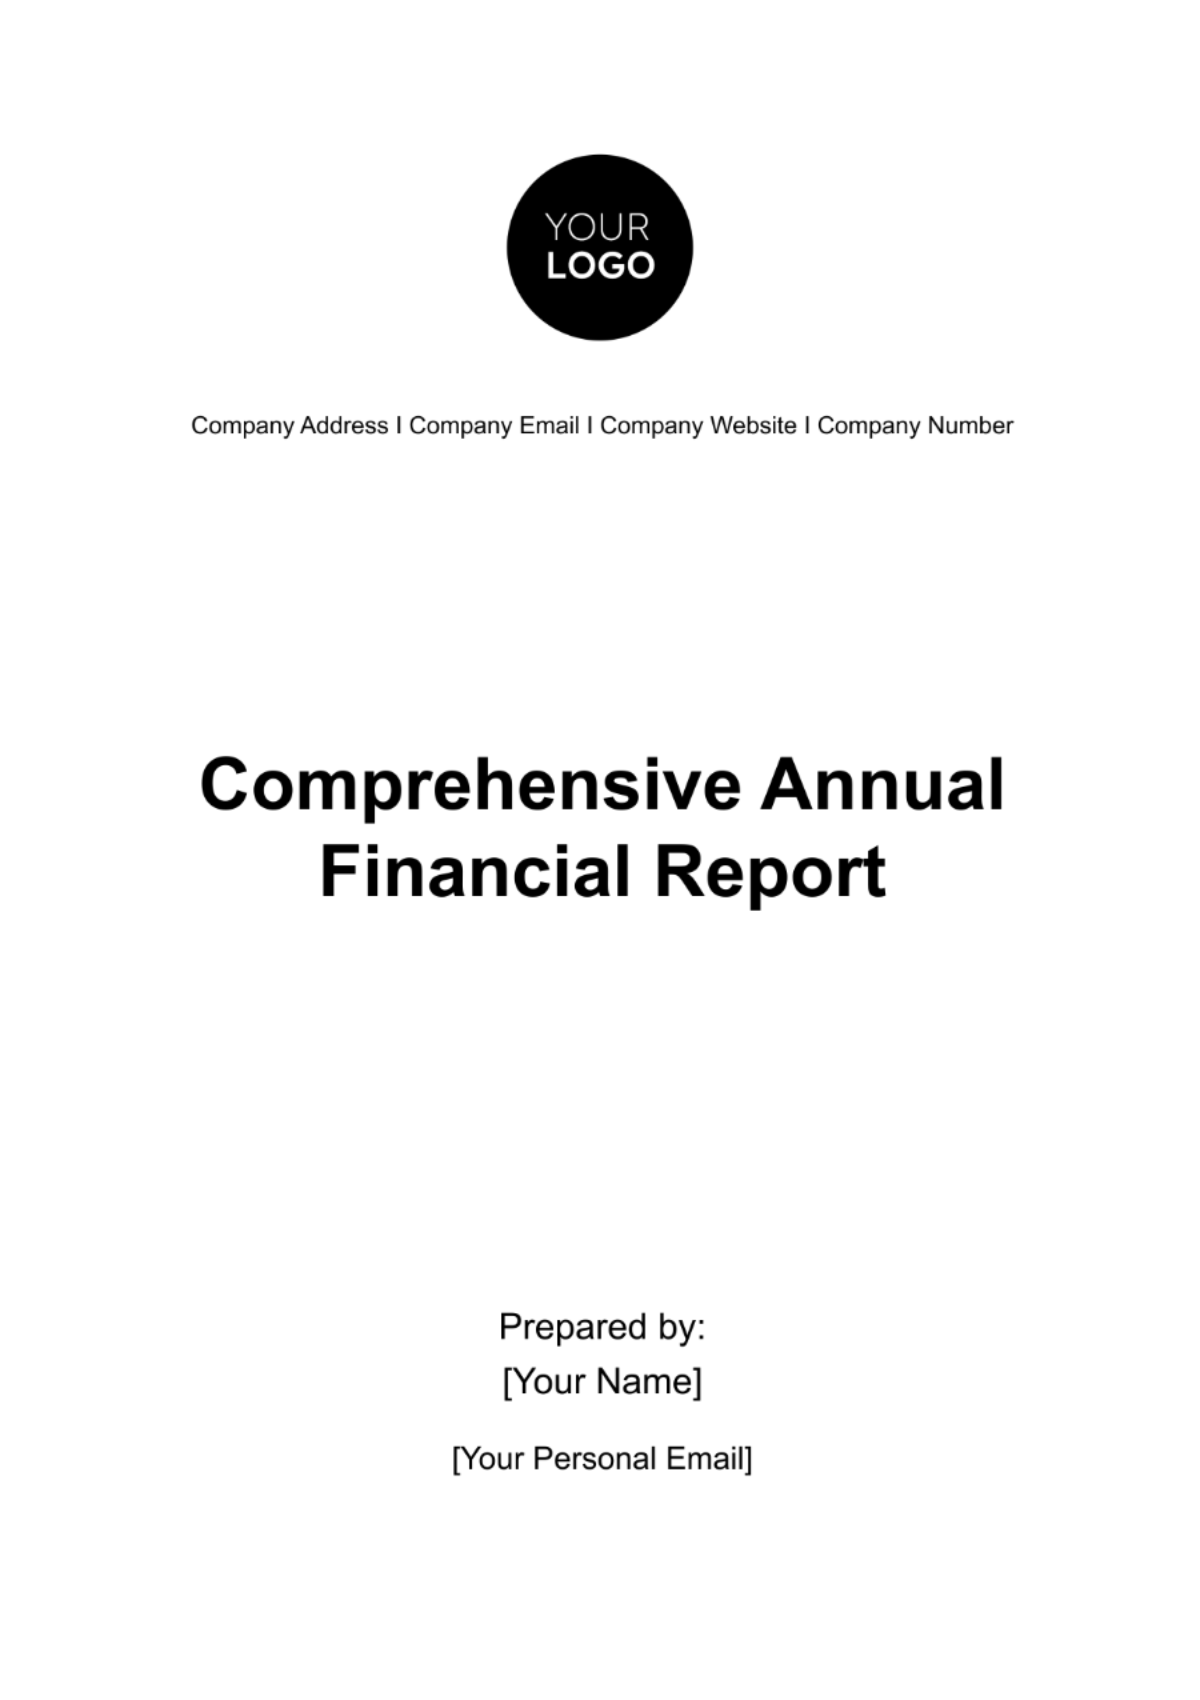 Comprehensive Annual Financial Report Template